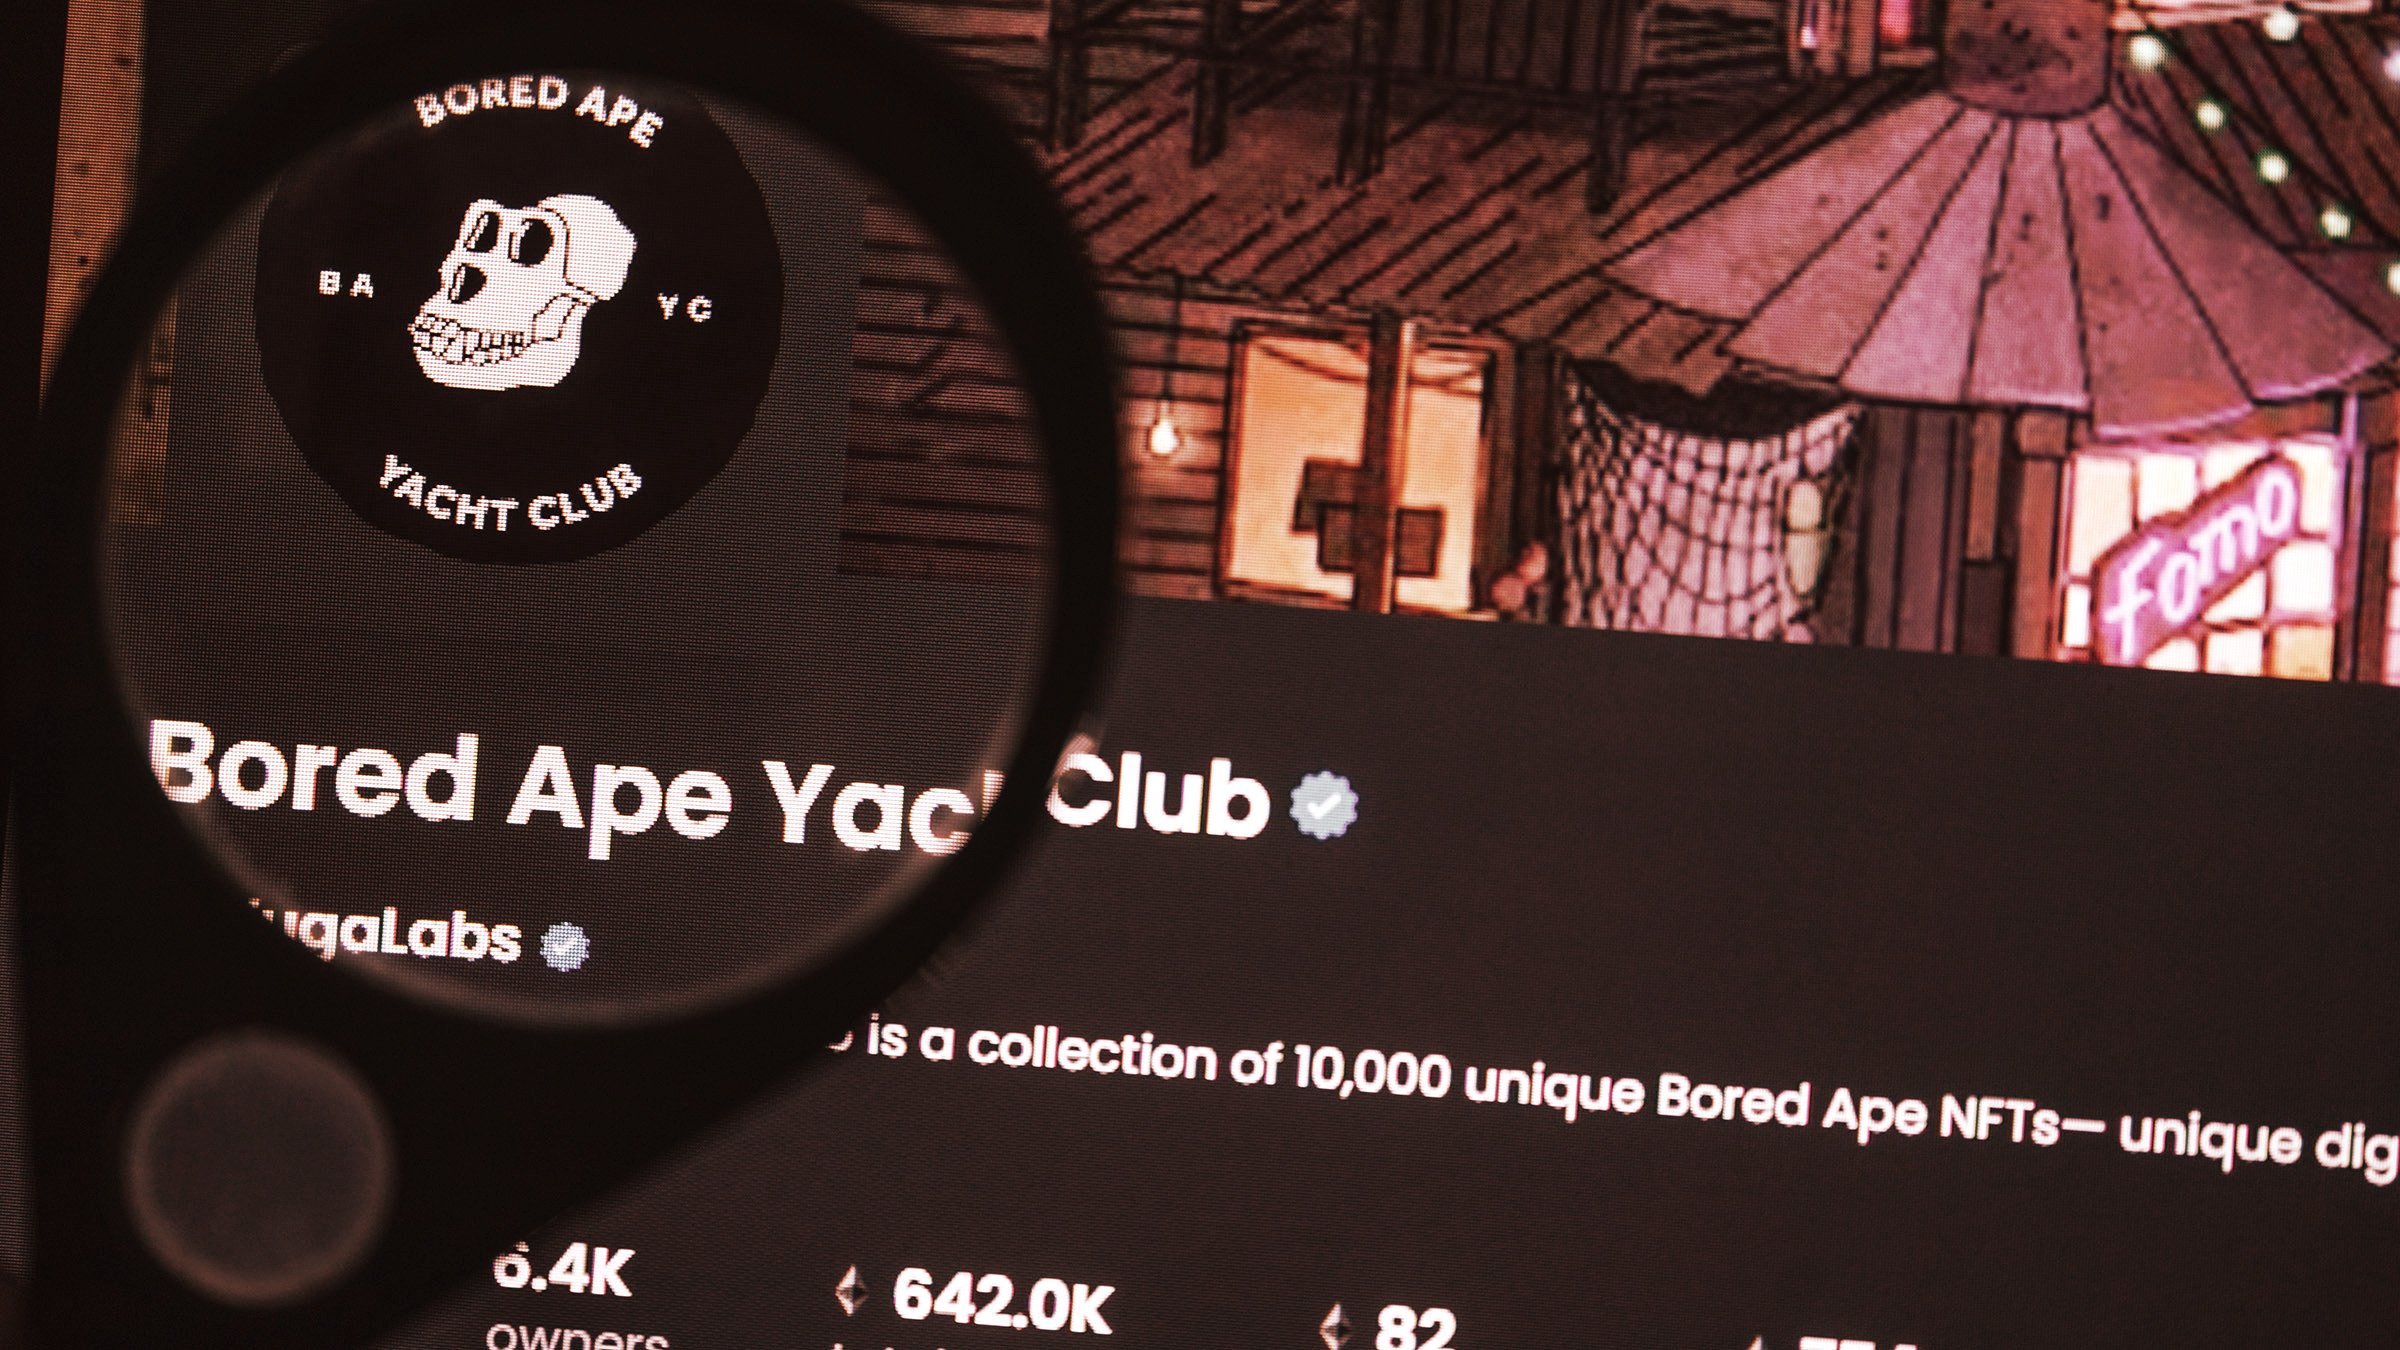 Bored Ape Yacht Club Community Council Formed by Yuga Labs